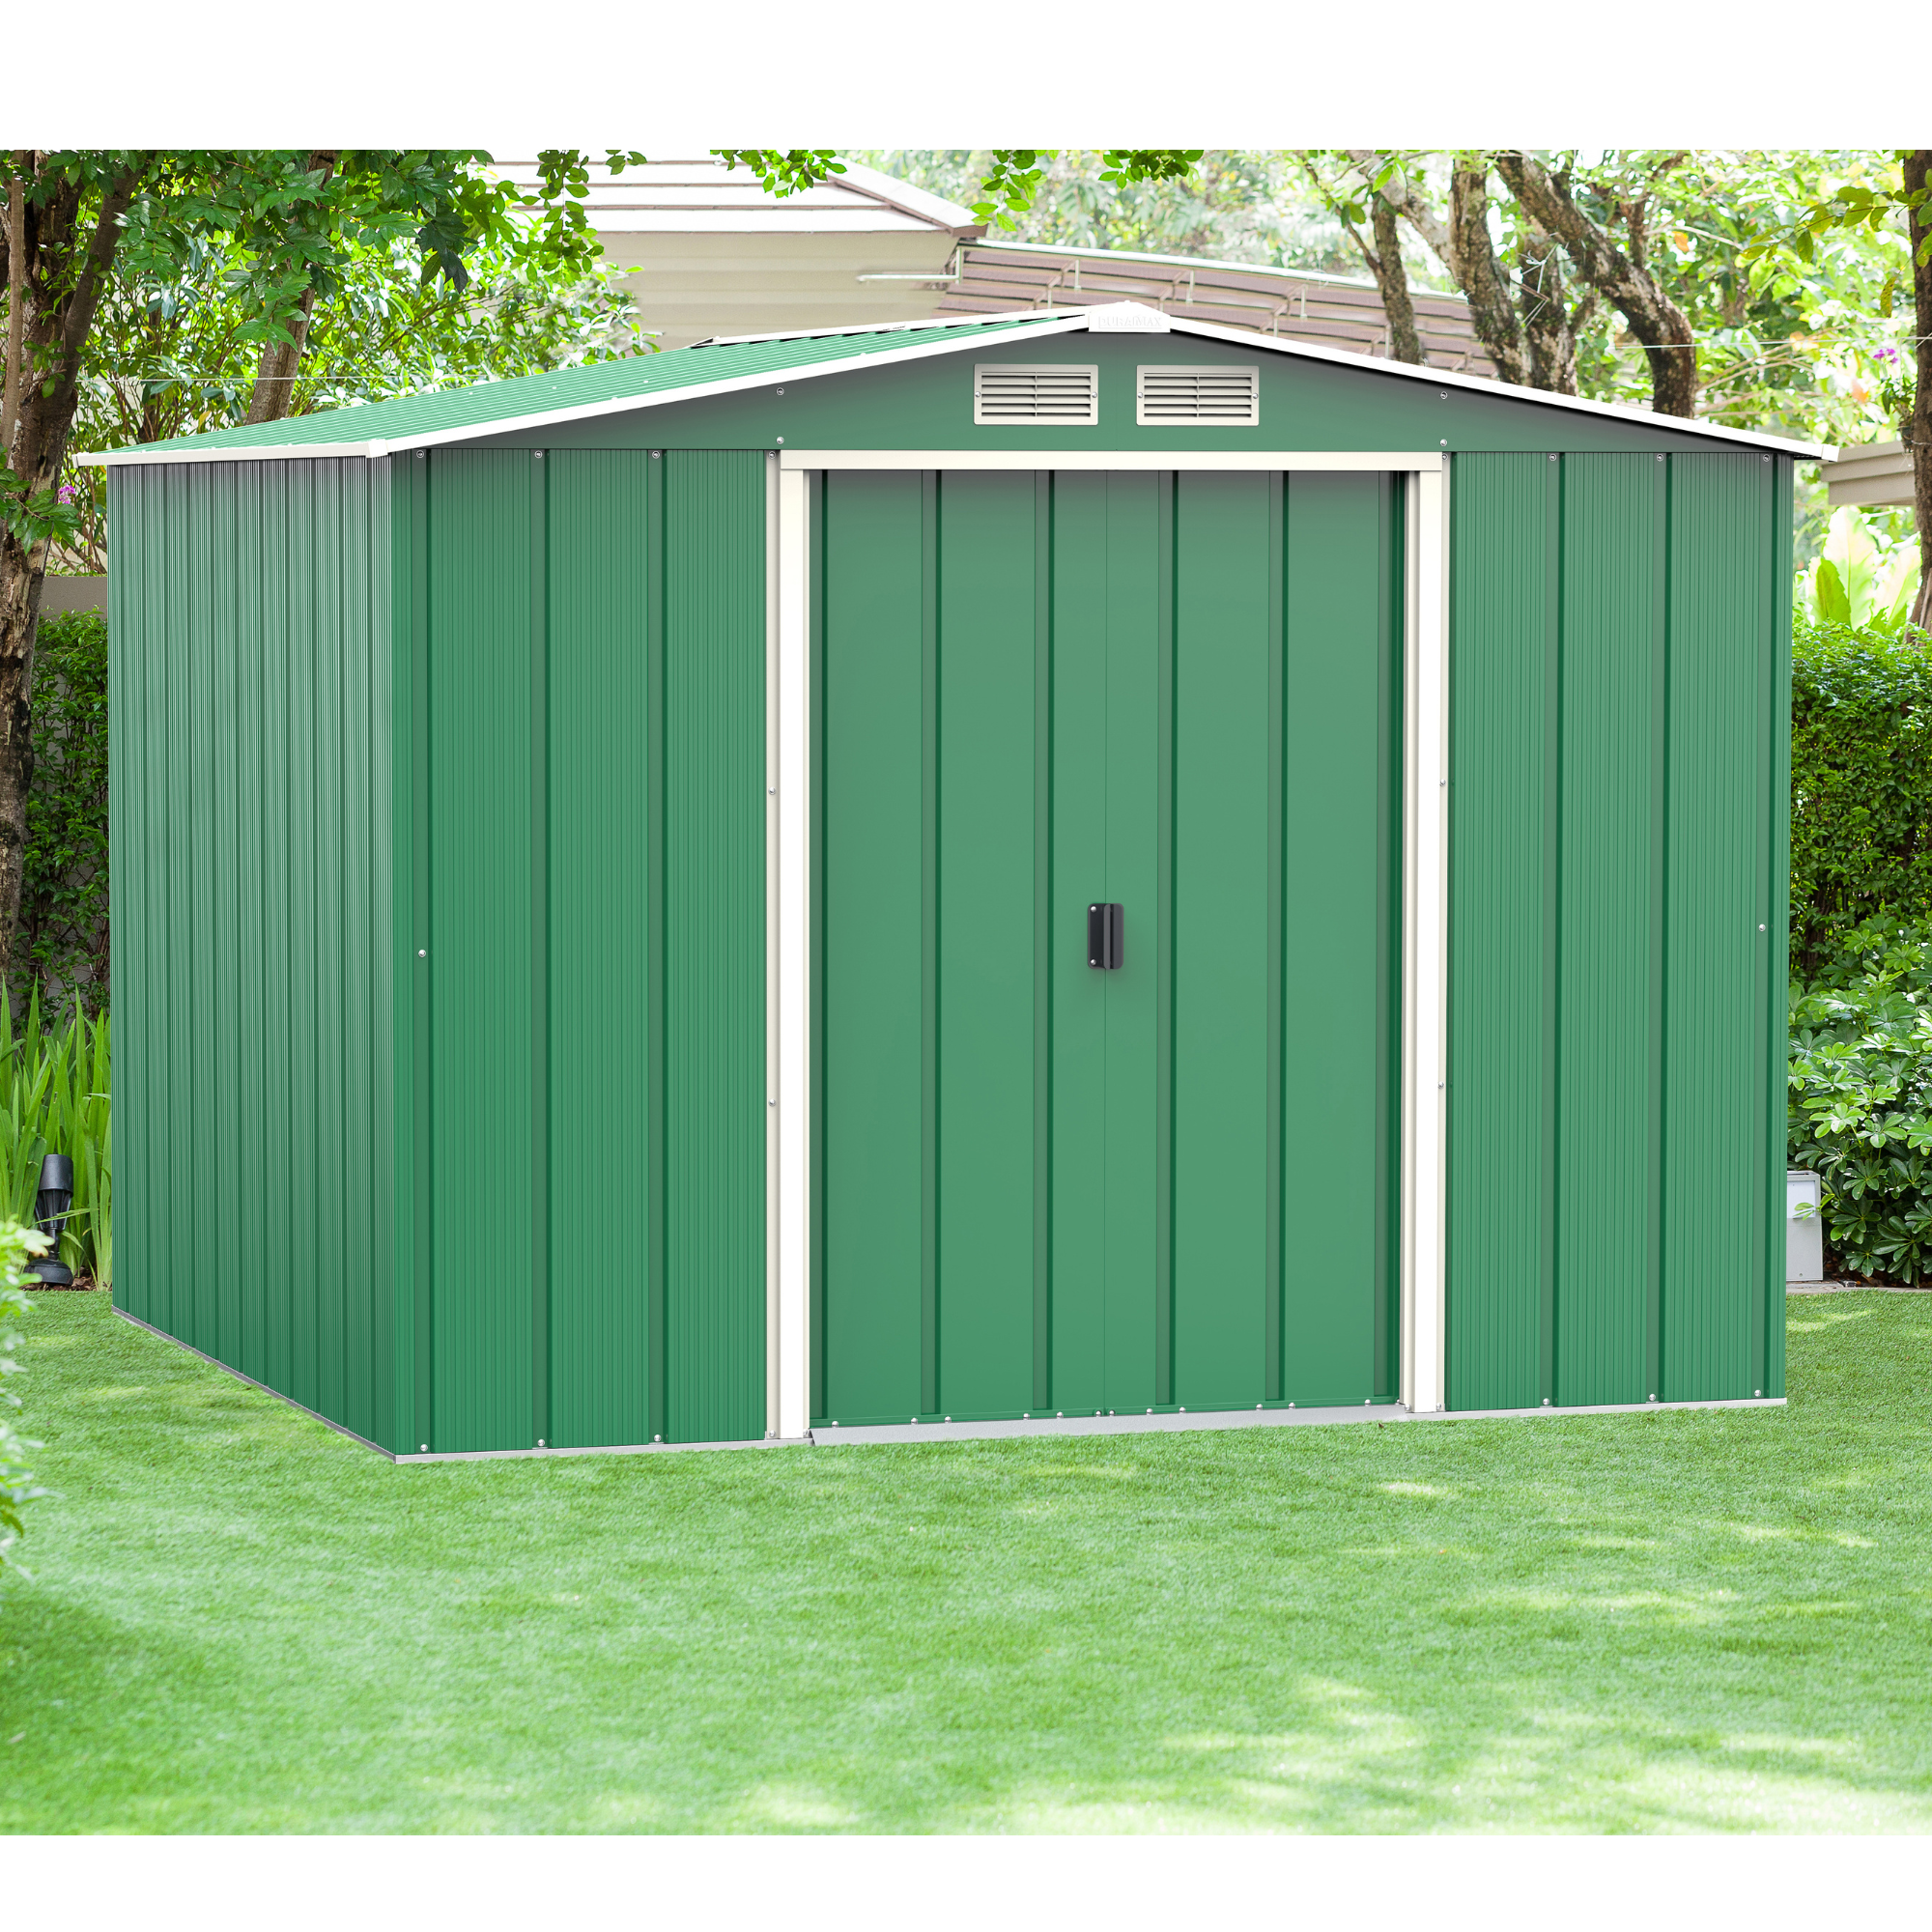 BillyOh Partner Eco Apex Roof Metal Shed - 8x8 Apex Eco